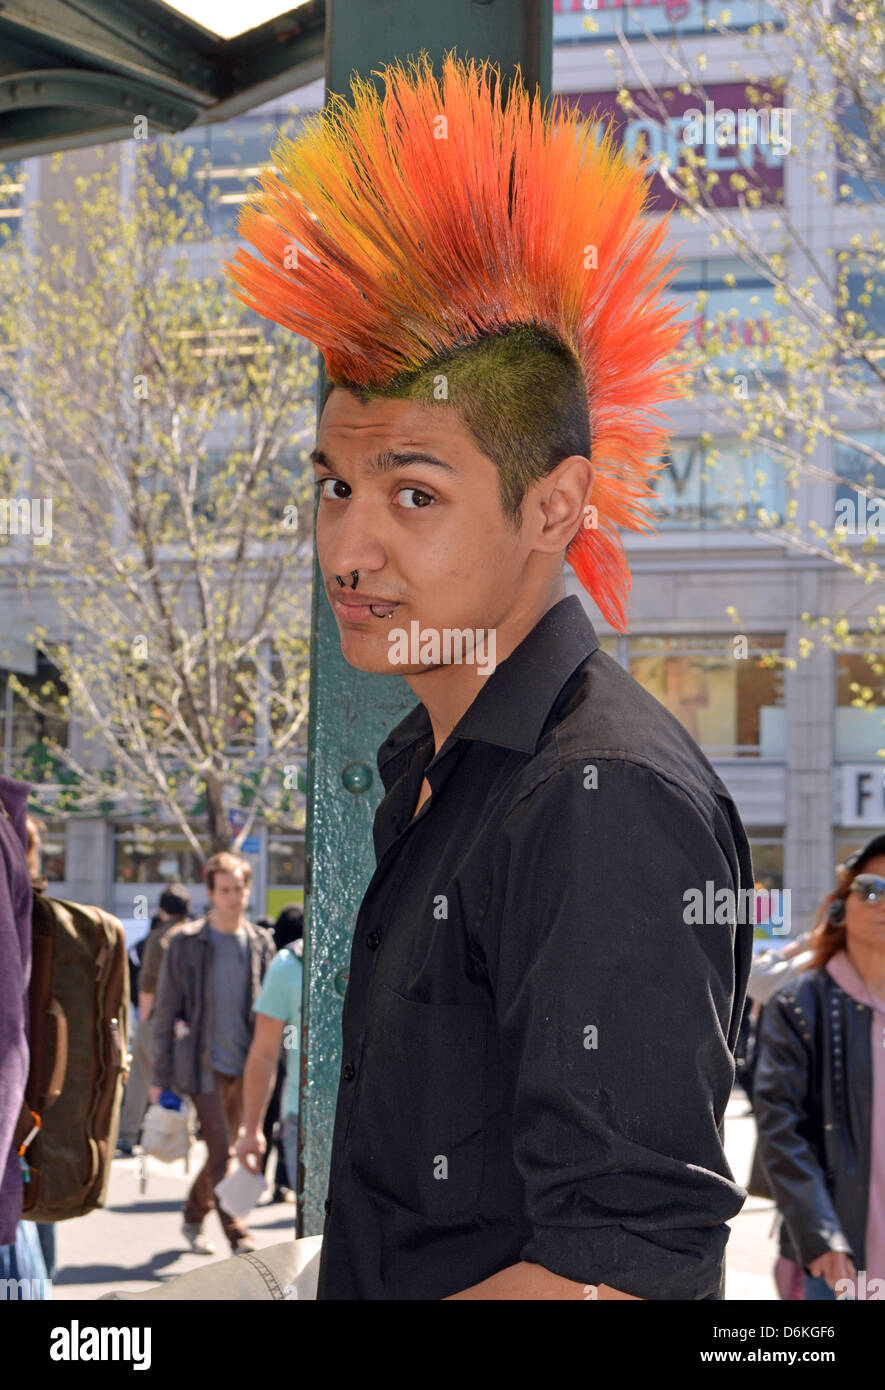 Young man with a colorful Mohawk haircut at Union Square Park in New York City Stock Photo